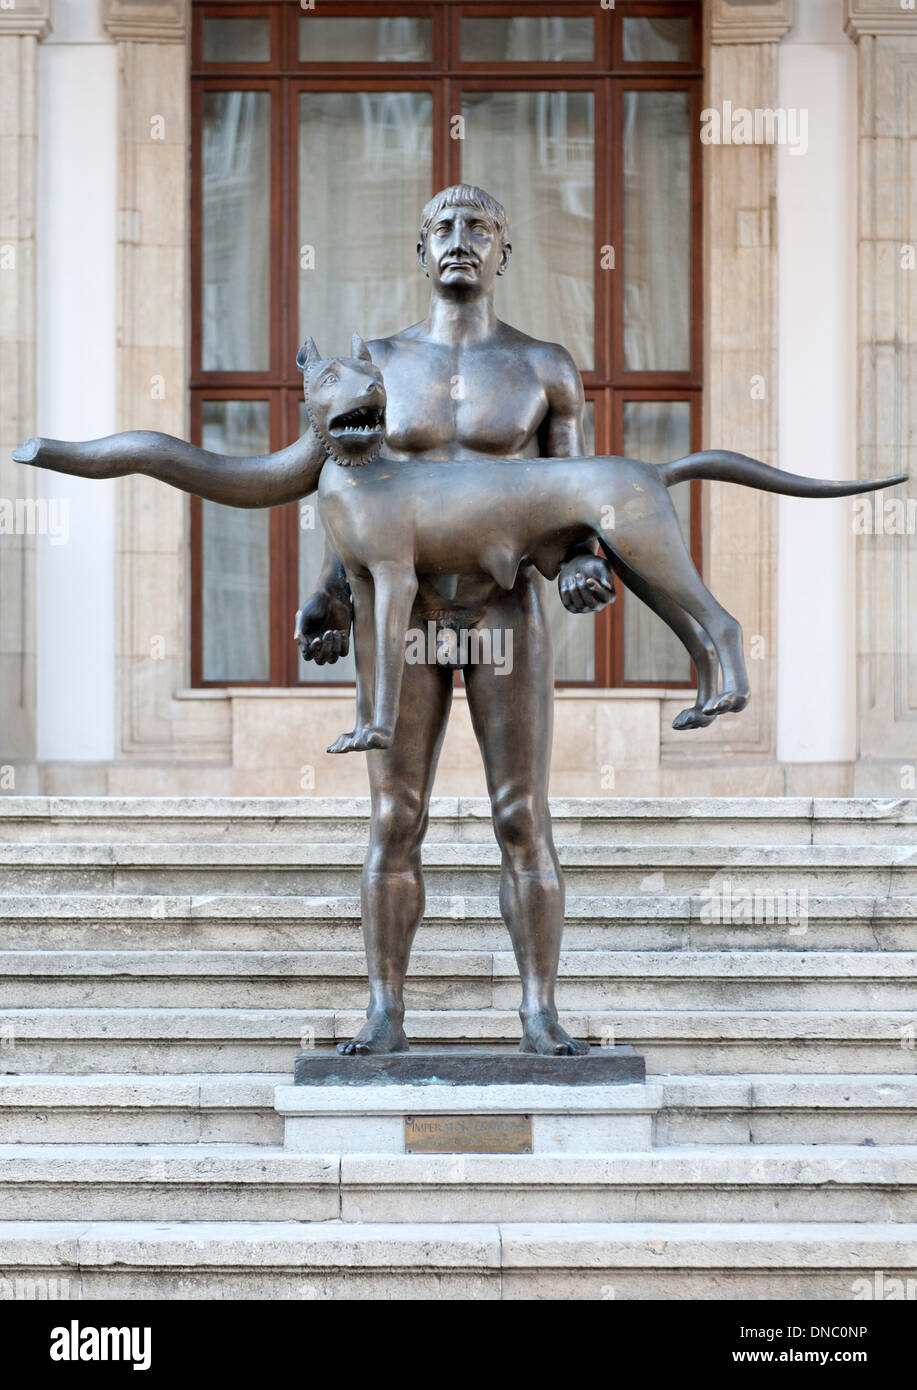 Statue of Trajan and the She-wolf on the steps of the National Museum of Romanian History in Bucharest, the capital of Romania. Stock Photo